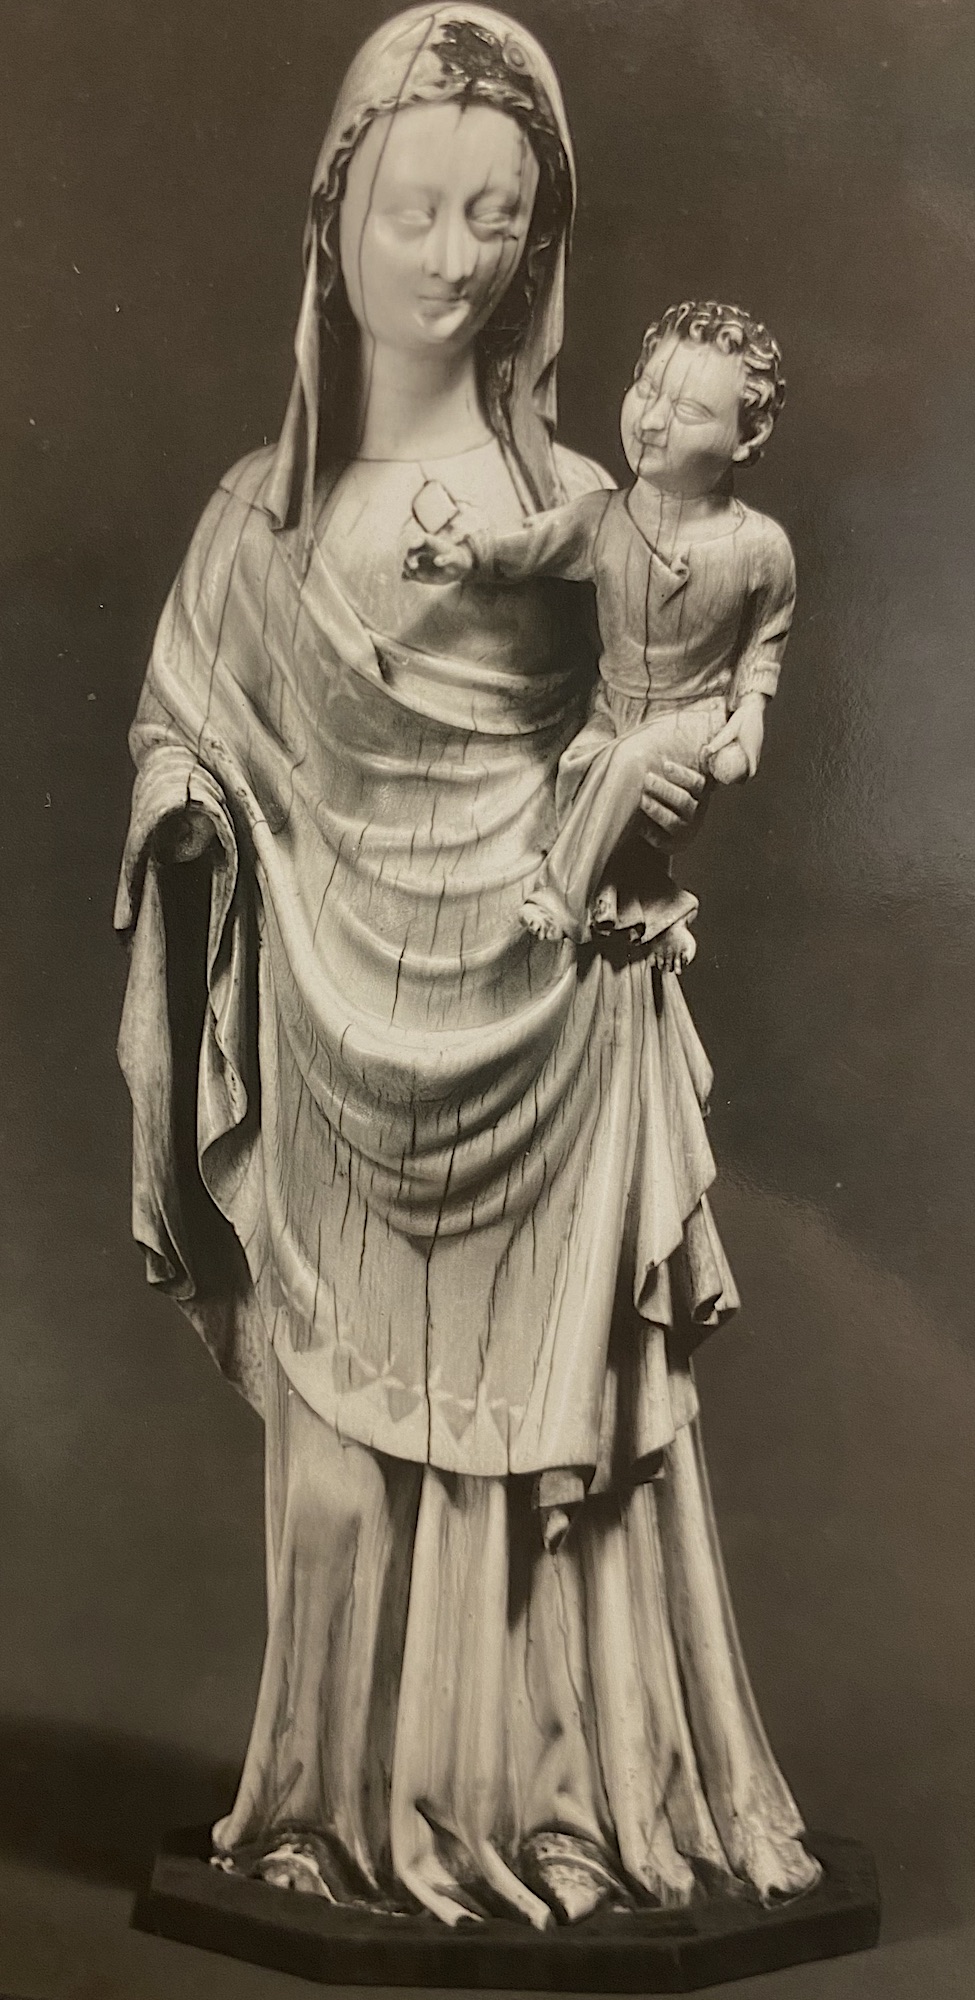 An ivory statuette of a veiled woman, draped with cloth over her long dress, holding in her left arm a male infant. The woman and child are both missing their right hands. The statuette is affixed to a stepped stone base against a studio background.